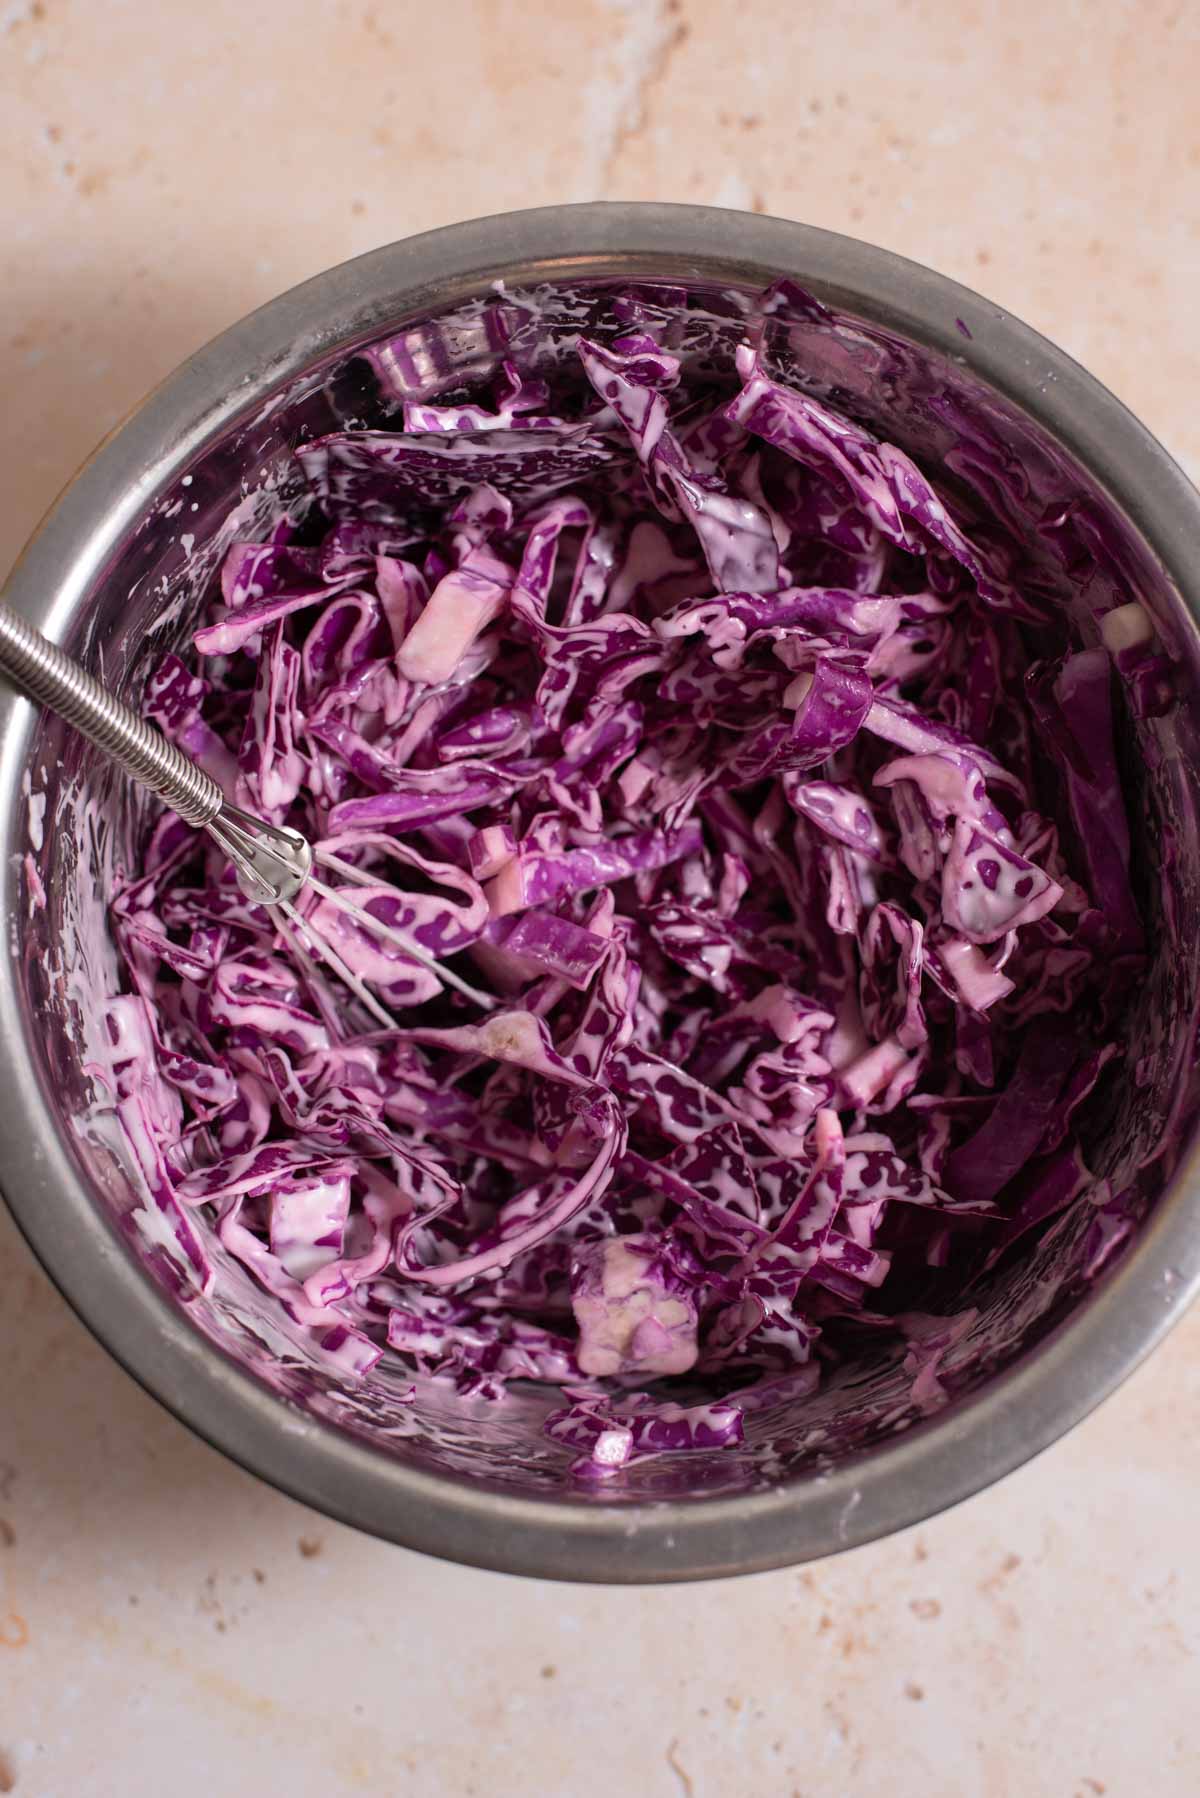 Shredded purple cabbage coleslaw with a small whisk in a metal mixing bowl